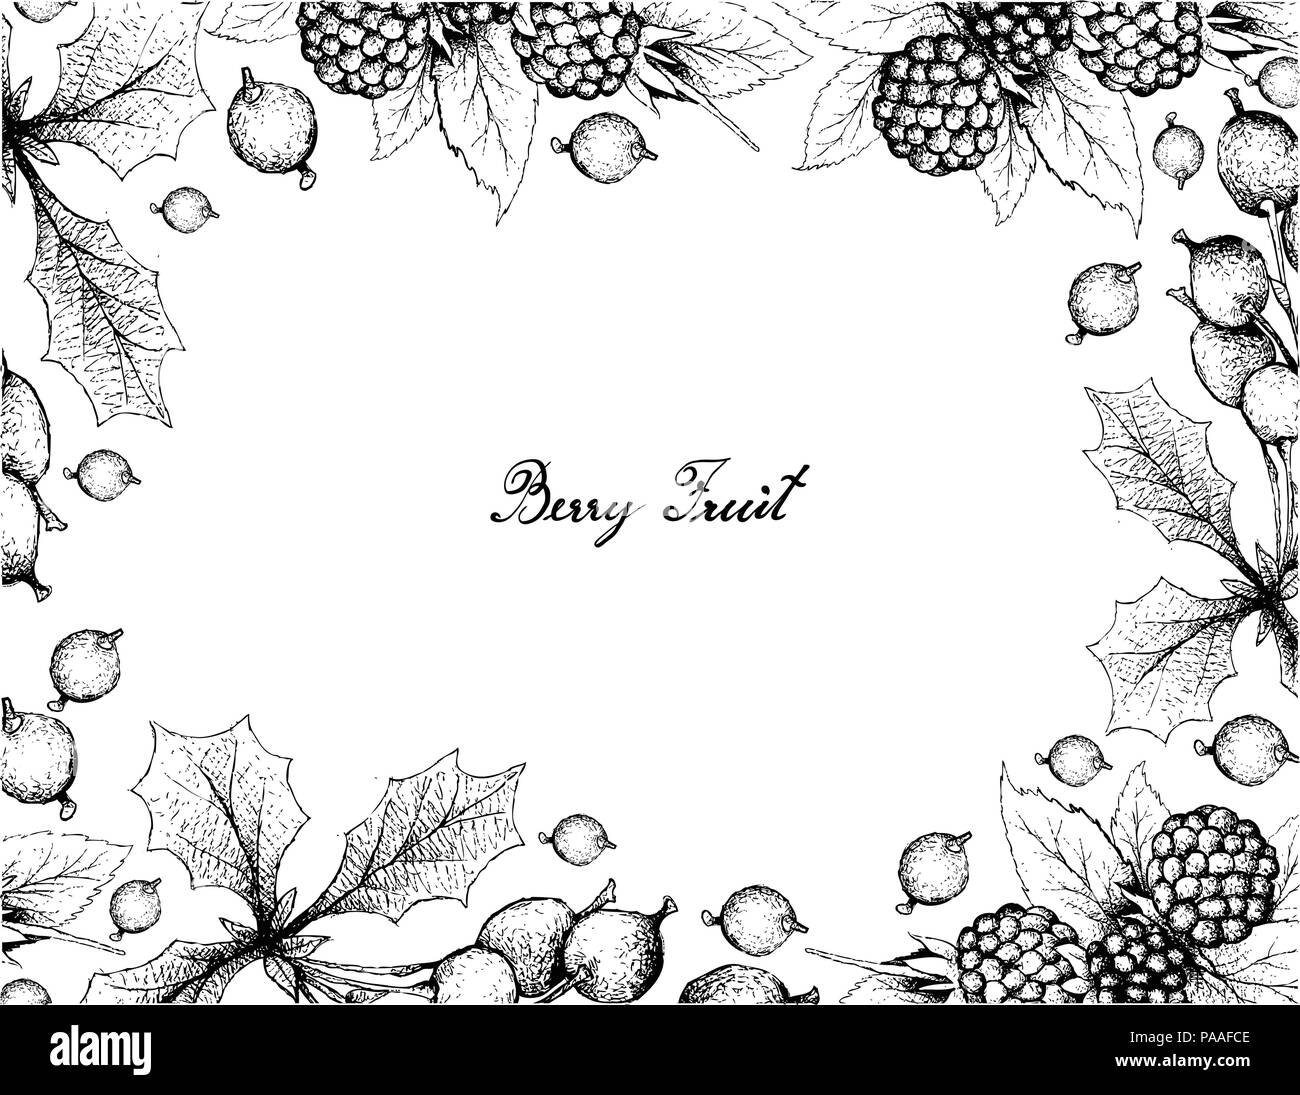 Berry Fruit, Illustration Frame of Hand Drawn Sketch of Fresh Dewberries and Barberries or Berberis Vulgaris Fruits Isolated on White Background. A Go Stock Vector